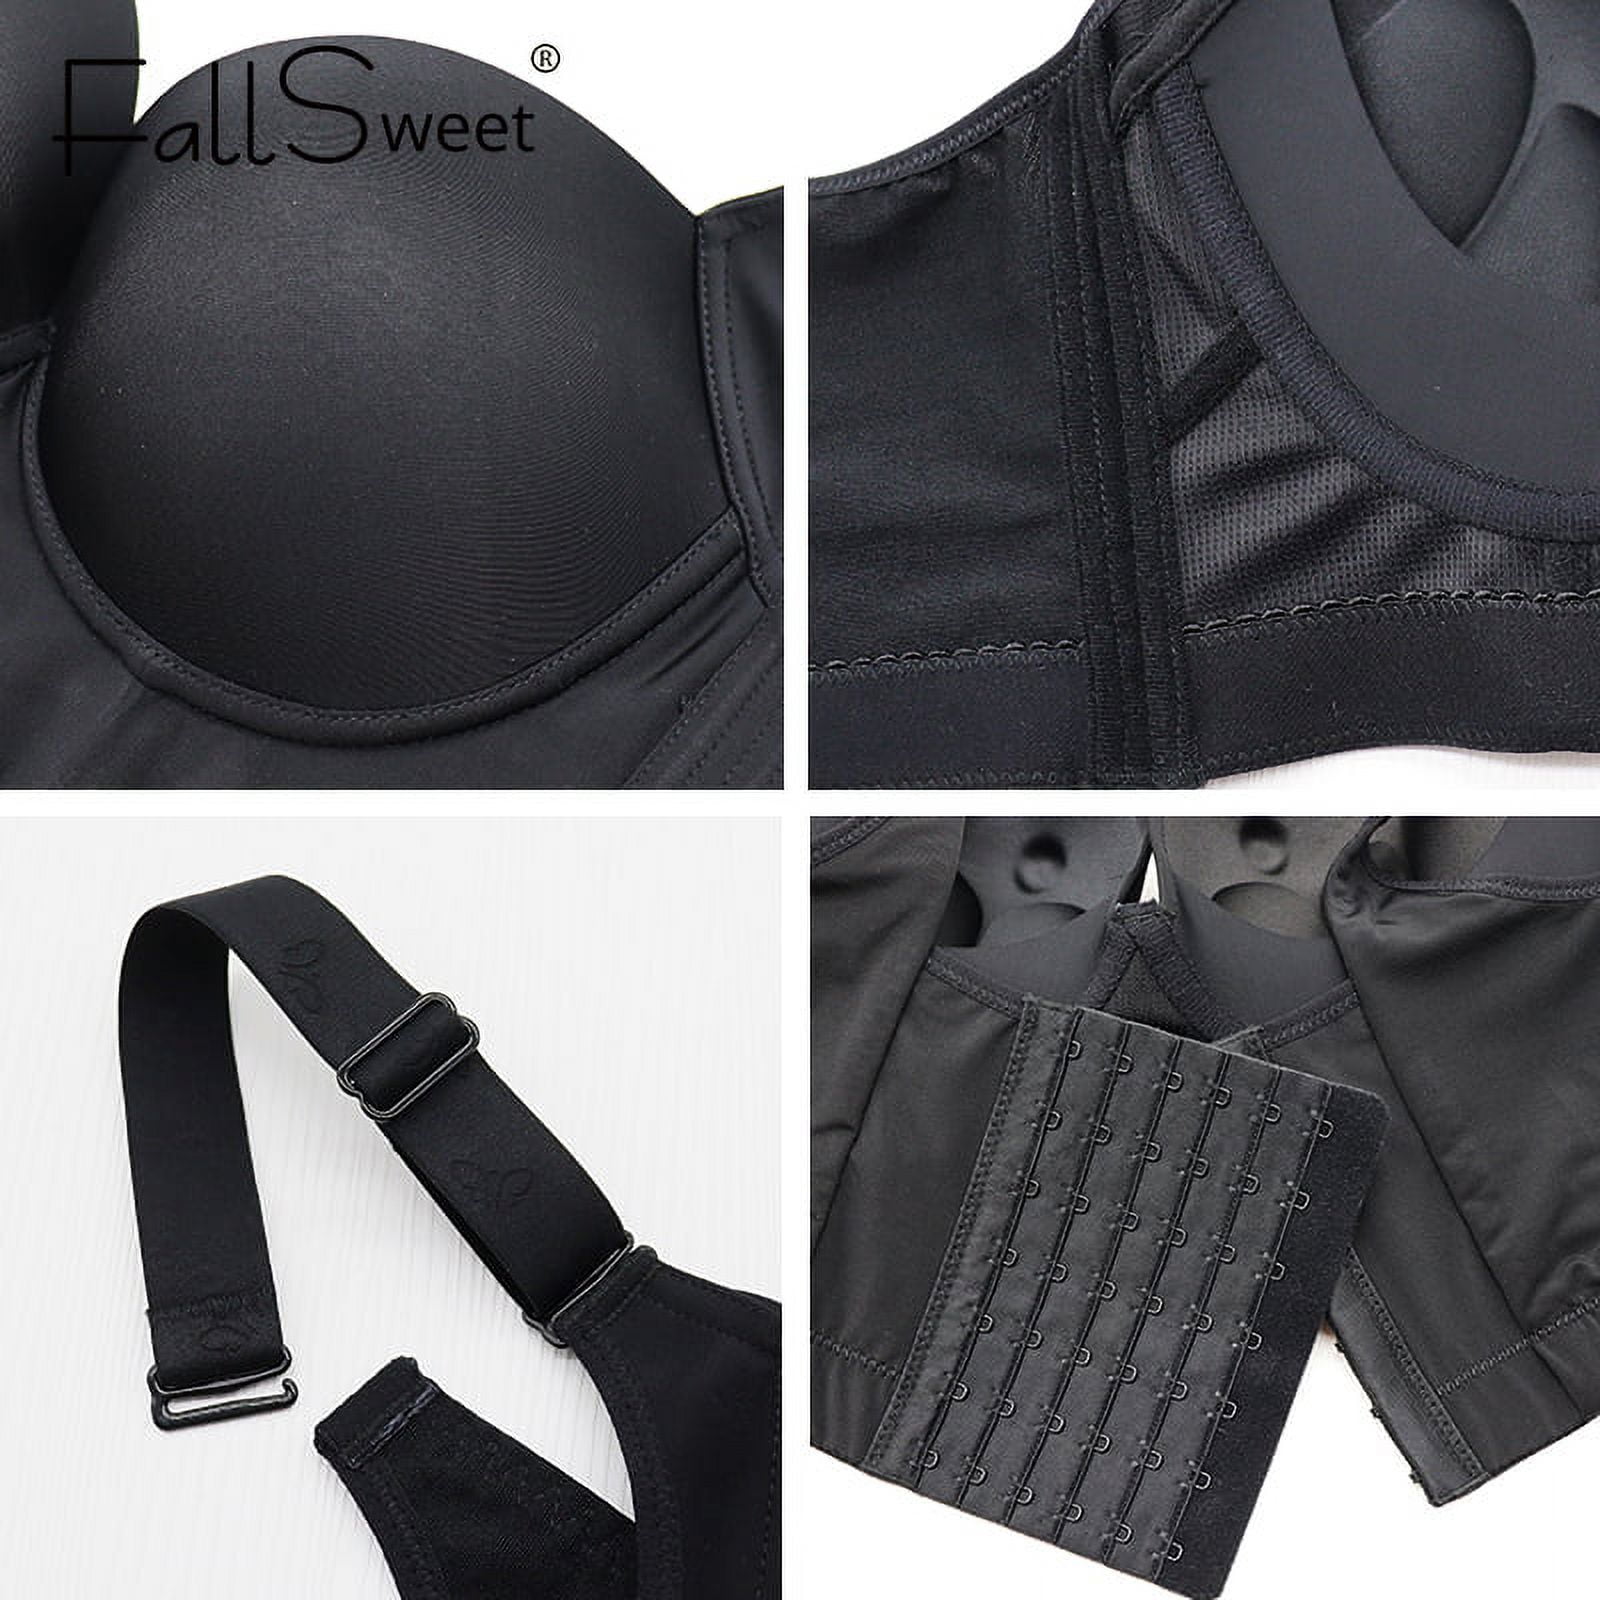 Plus Size Bras for Women Hide Back Fat Underwear Shpaer Incorporated Full  Back Coverage Deep Cup Sexy Push Up Bra Lingerie 